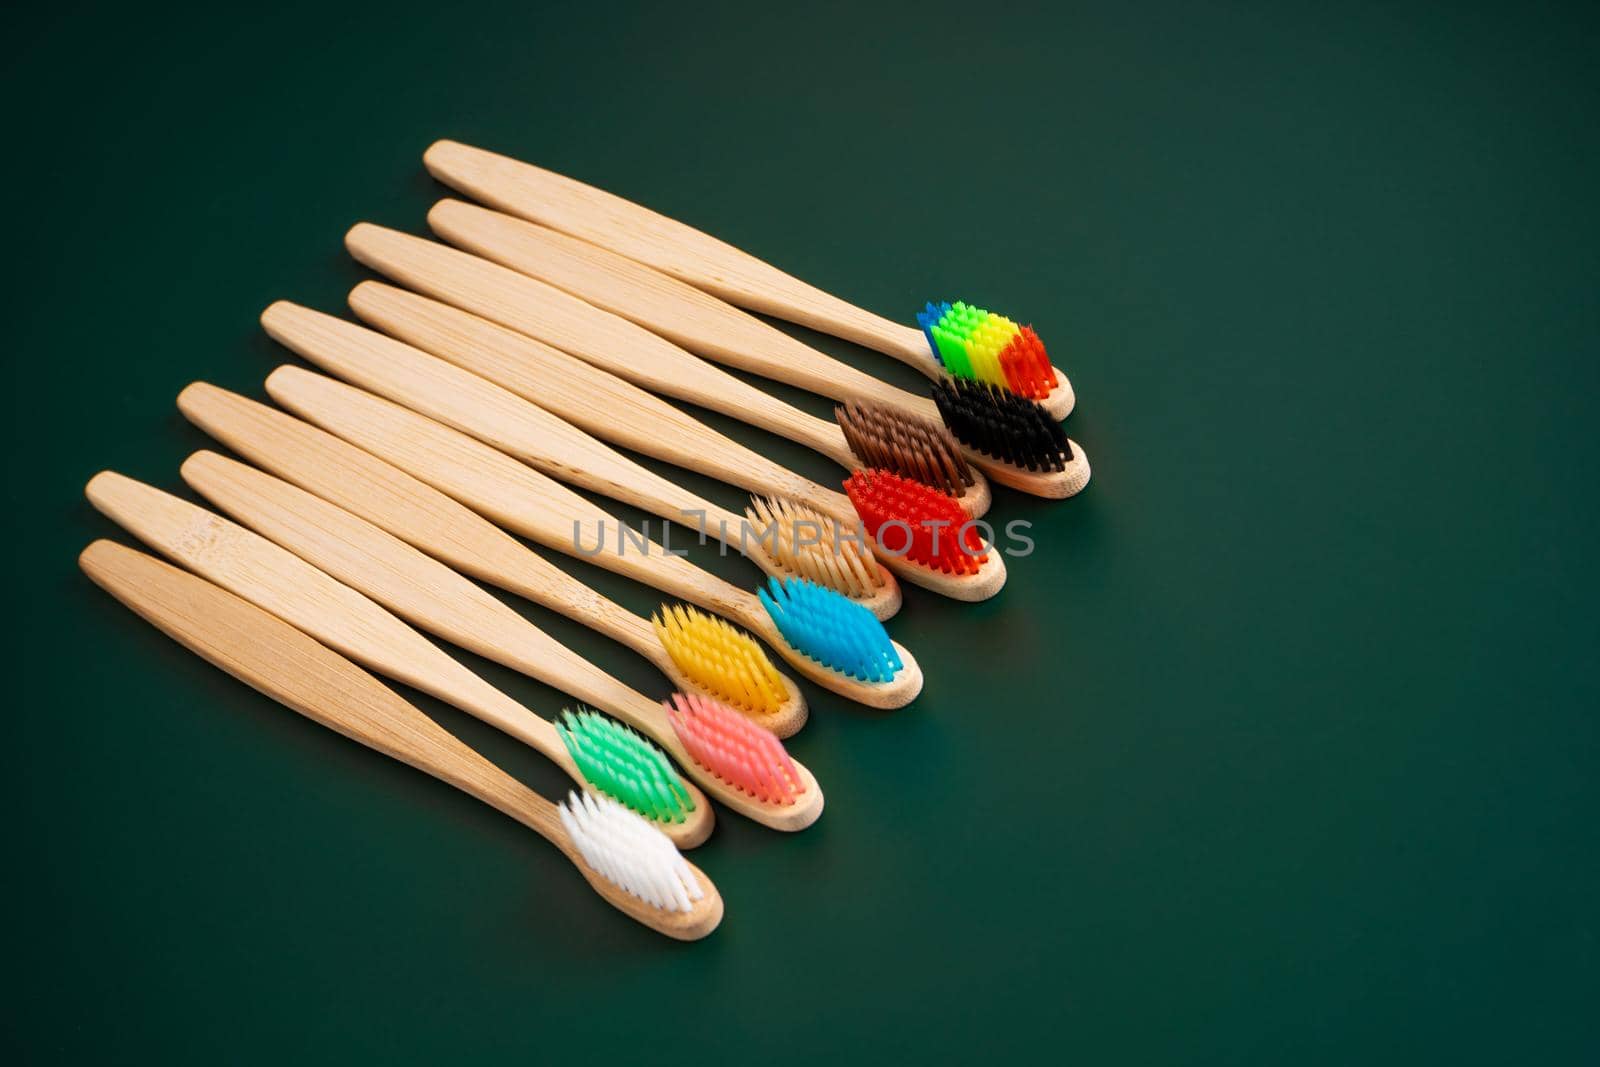 A set of Eco-friendly antibacterial toothbrushes made of bamboo wood on a dark green background. Environmental trends.